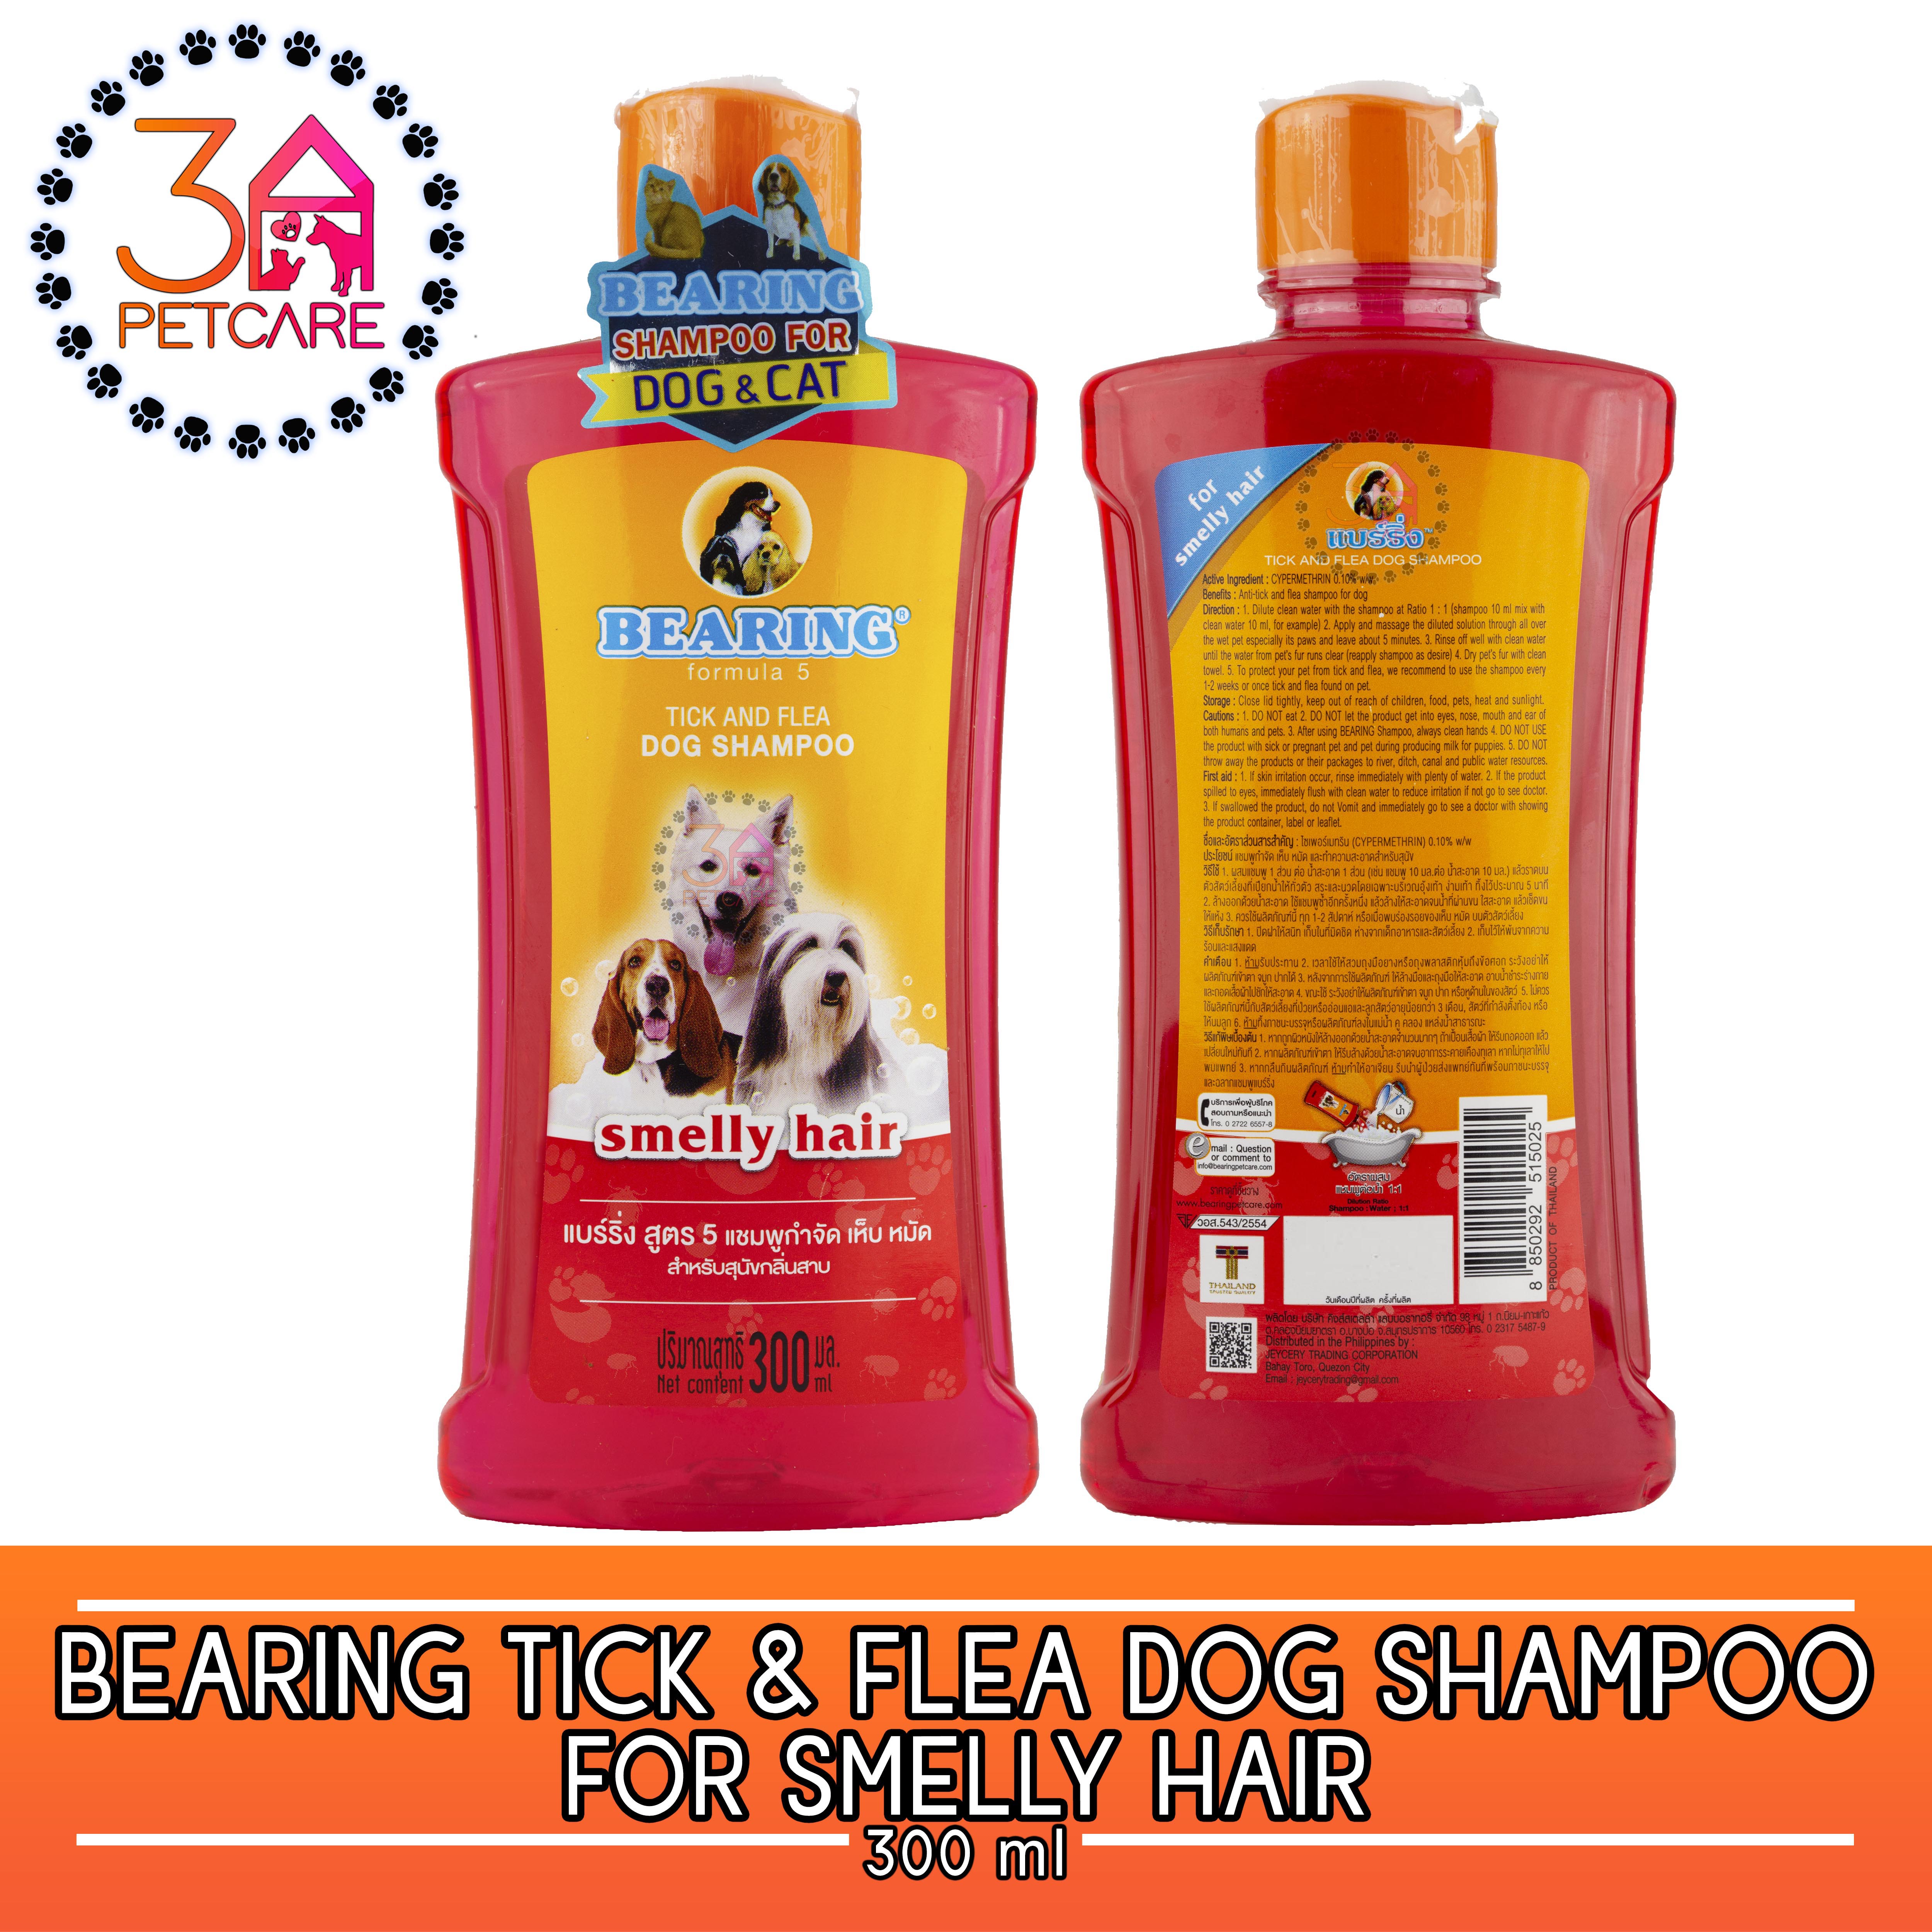 what is the difference between cat and dog shampoo